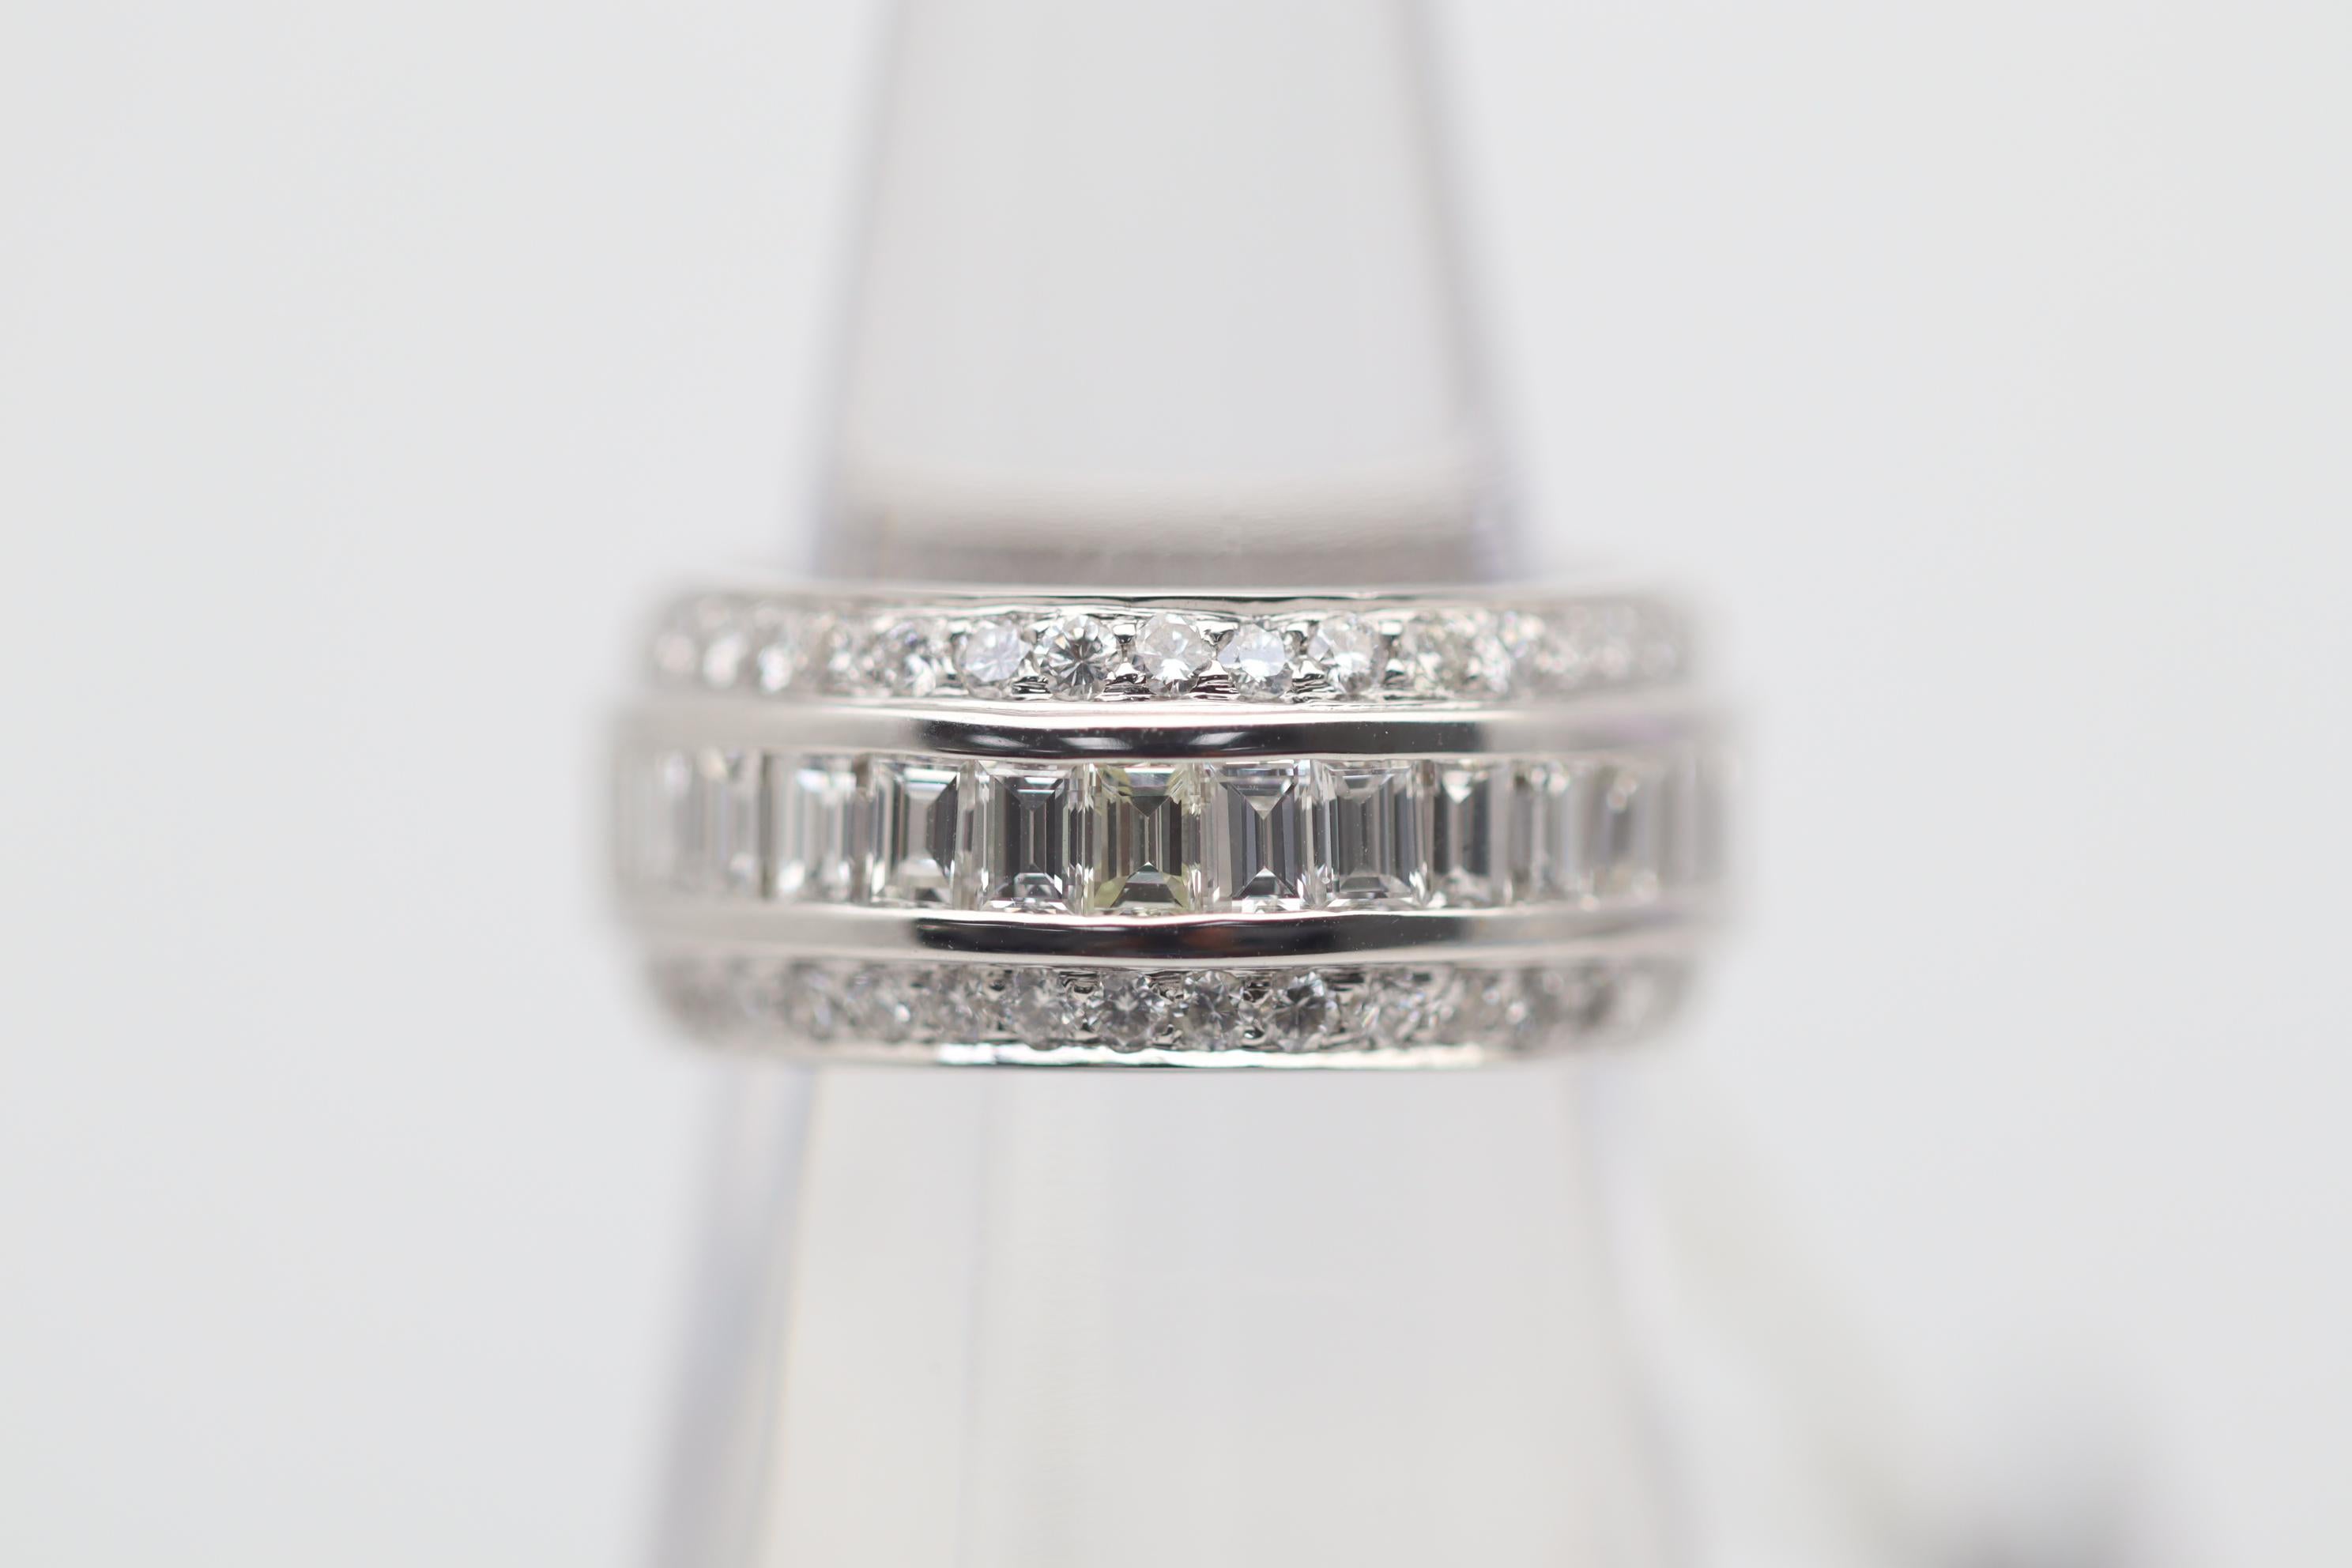 A unique take on the classic diamond eternity ring! This piece features a single row of baguette-cut diamonds which are channel-set in the middle along with two outer rows of round brilliant-cut diamonds. The total diamond weight is 5.09 carats, and